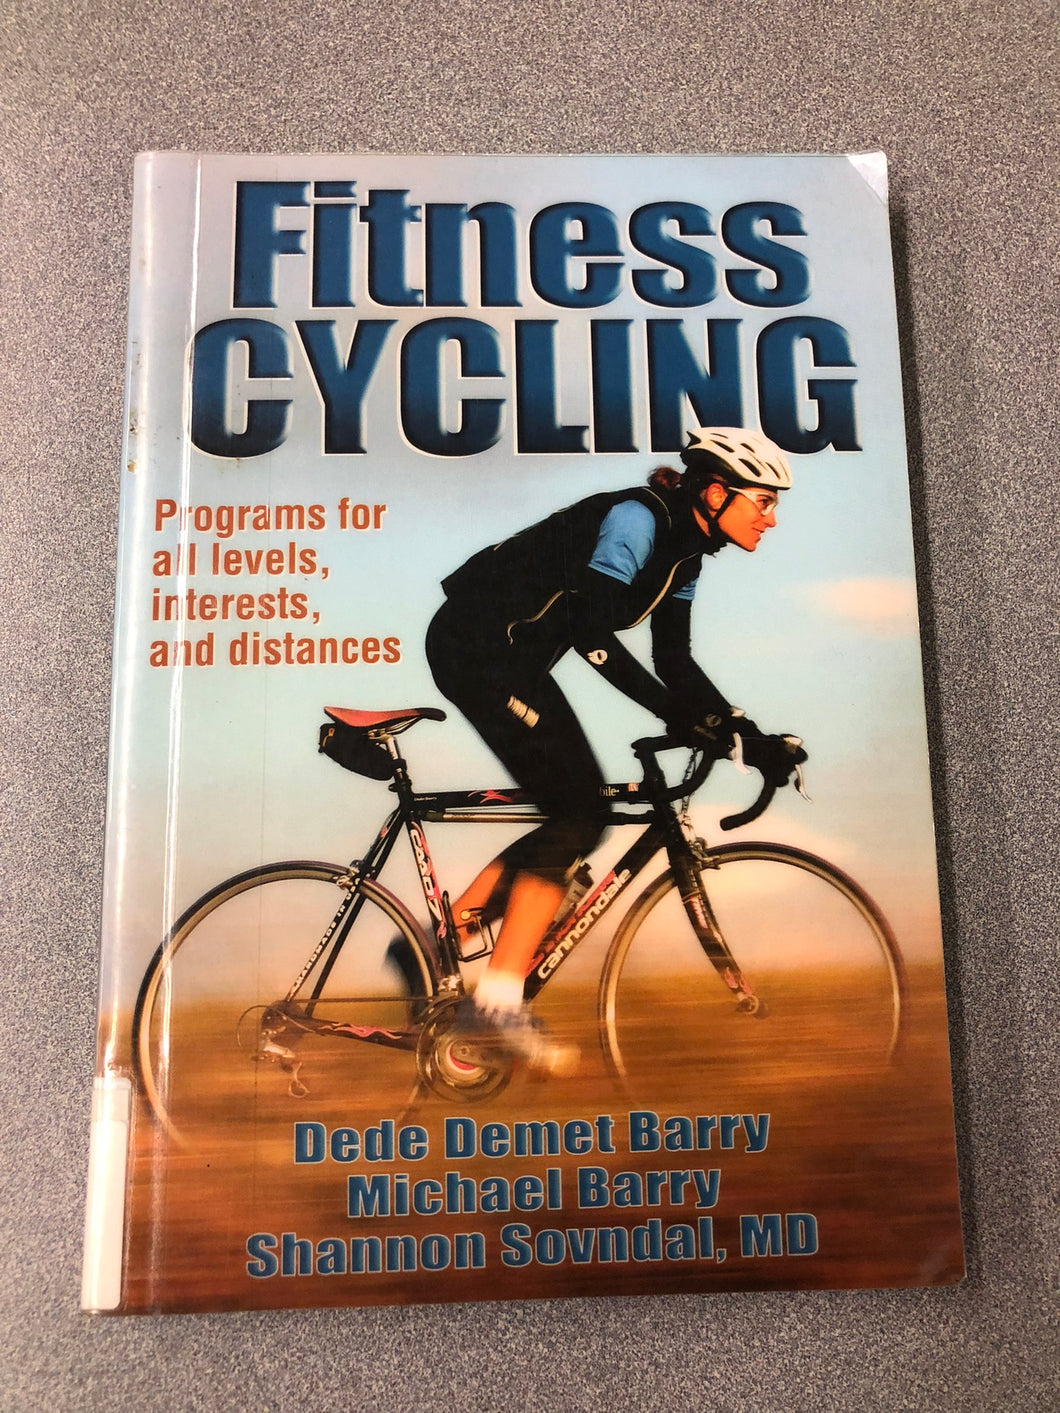 Fitness Cycling: Programs for All Levels, Interests, and Distances, Barry, Dede Demet et al [2006] OU 5/22